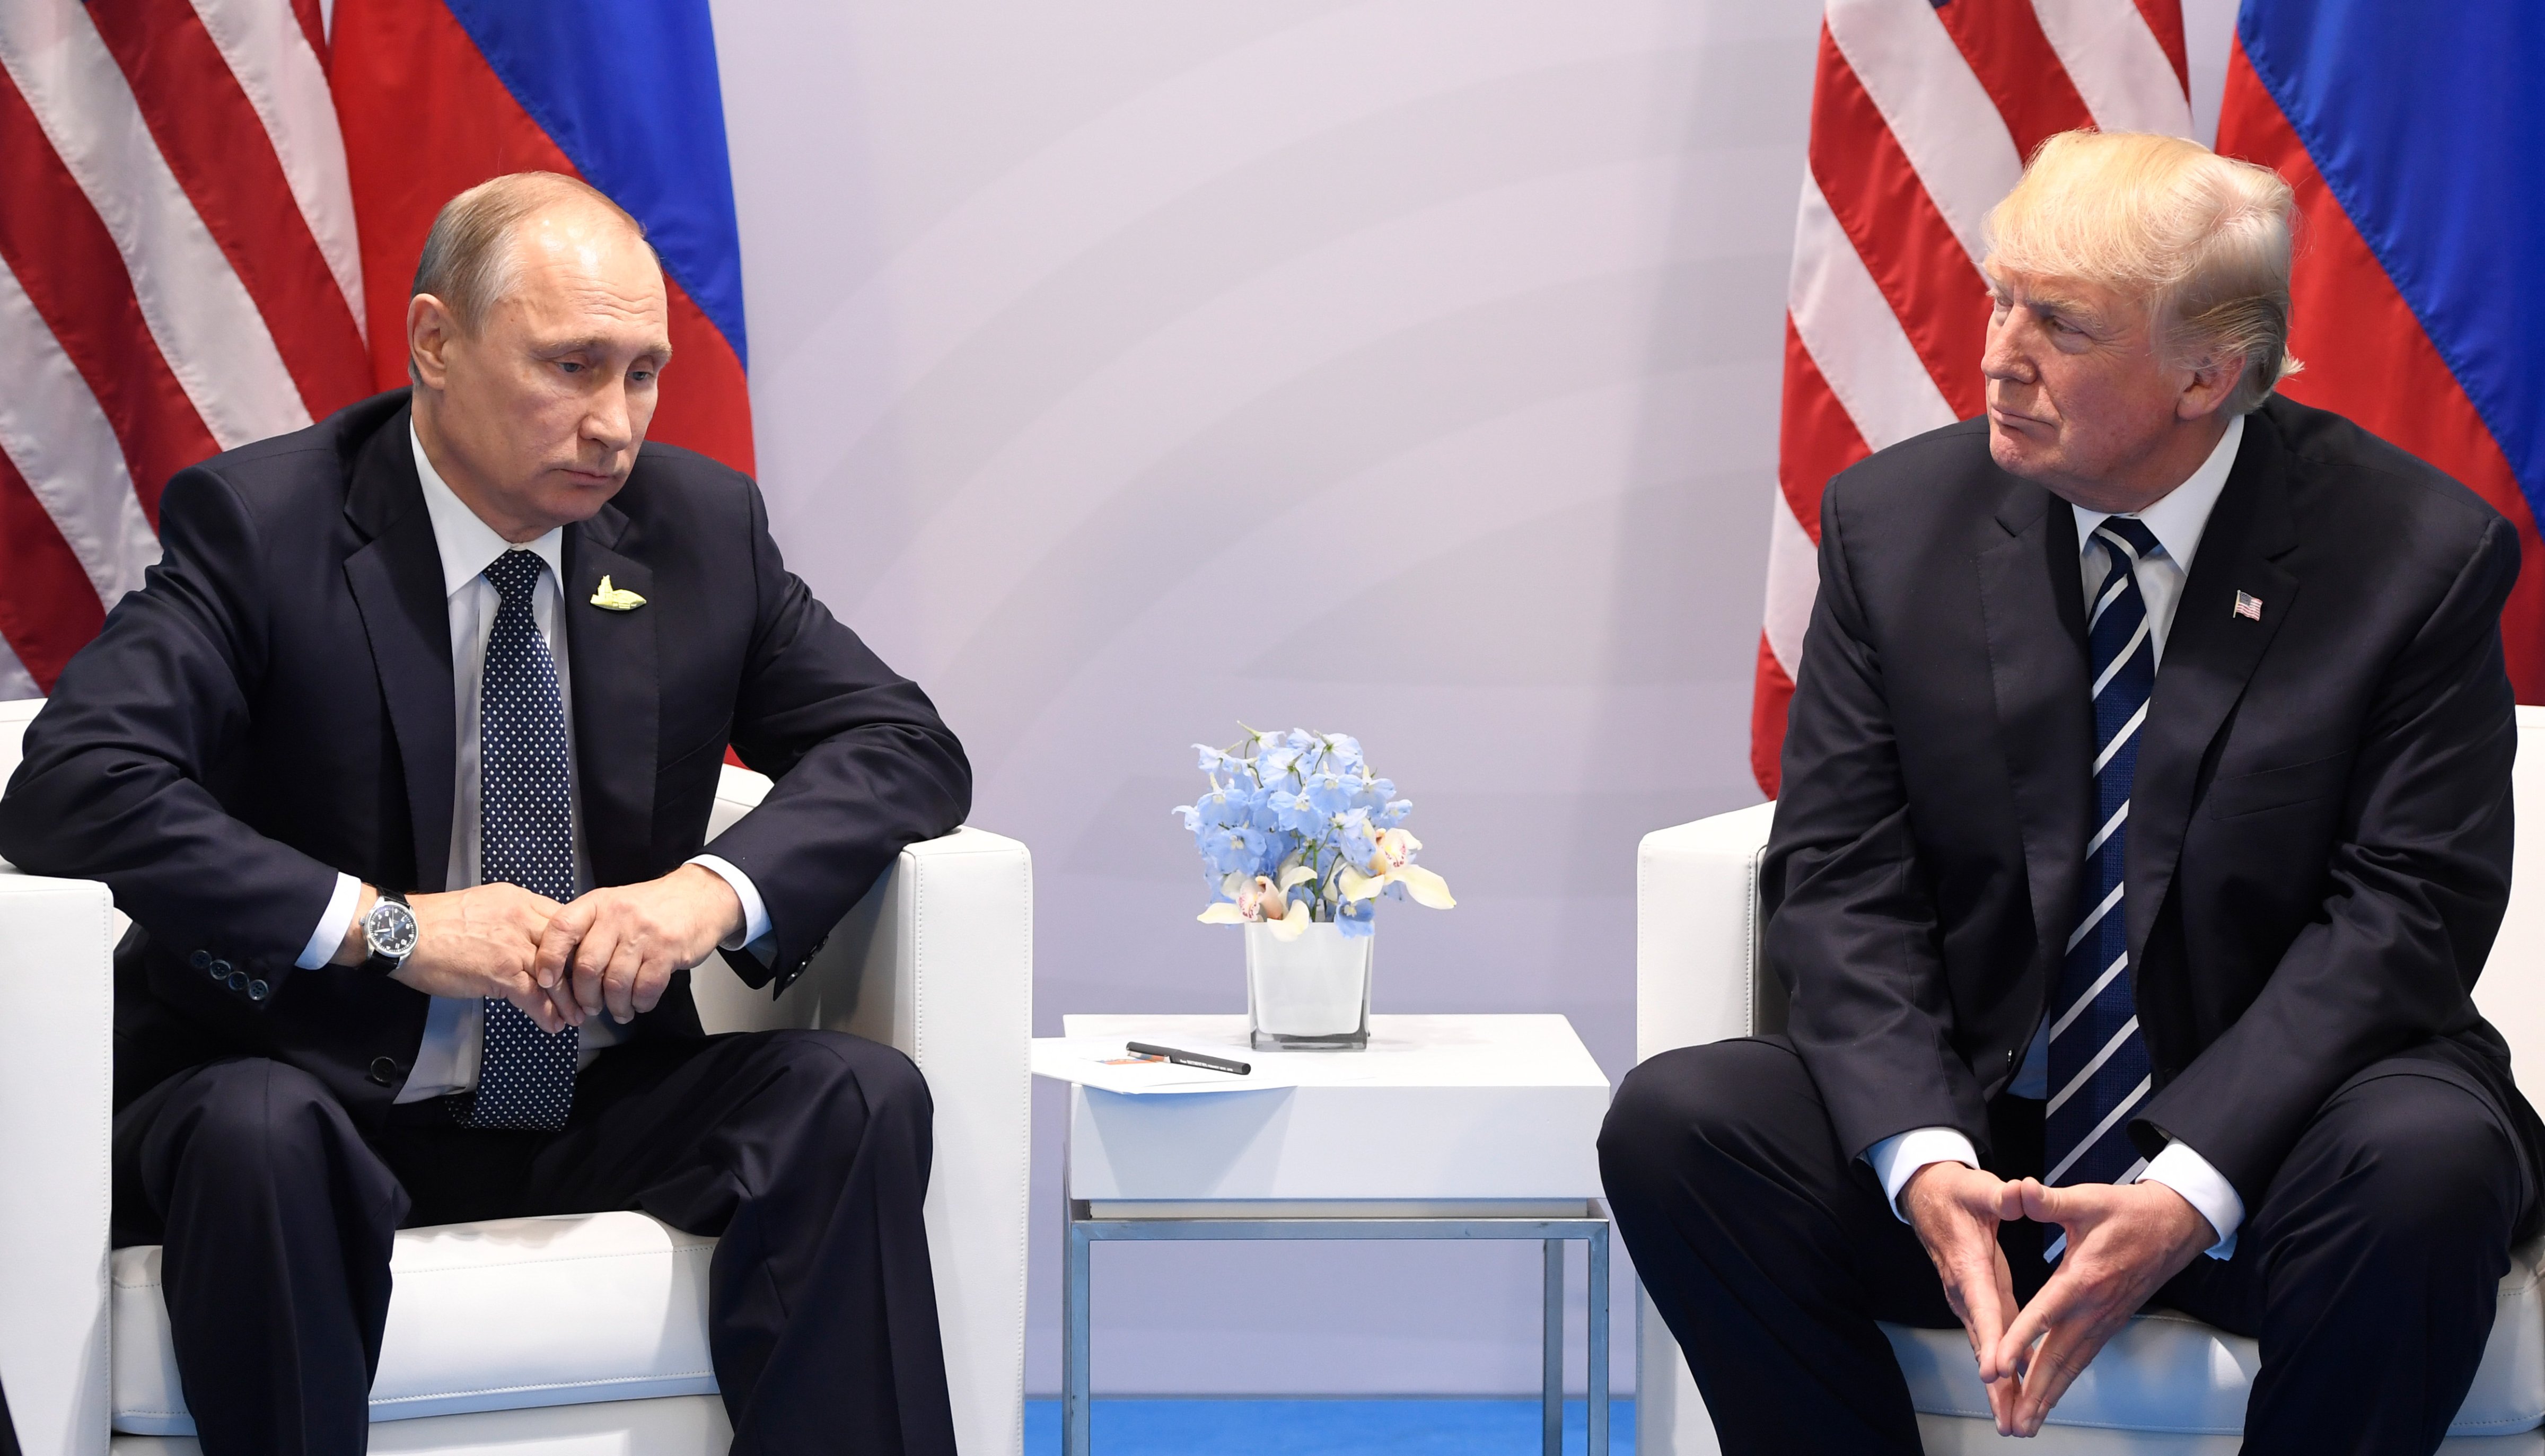 US President Donald Trump and Russia's President Vladimir Putin shake hands during a meeting on the sidelines of the G20 Summit in Hamburg, Germany, on July 7, 2017. (Saul Loeb&mdash;AFP/Getty Images)